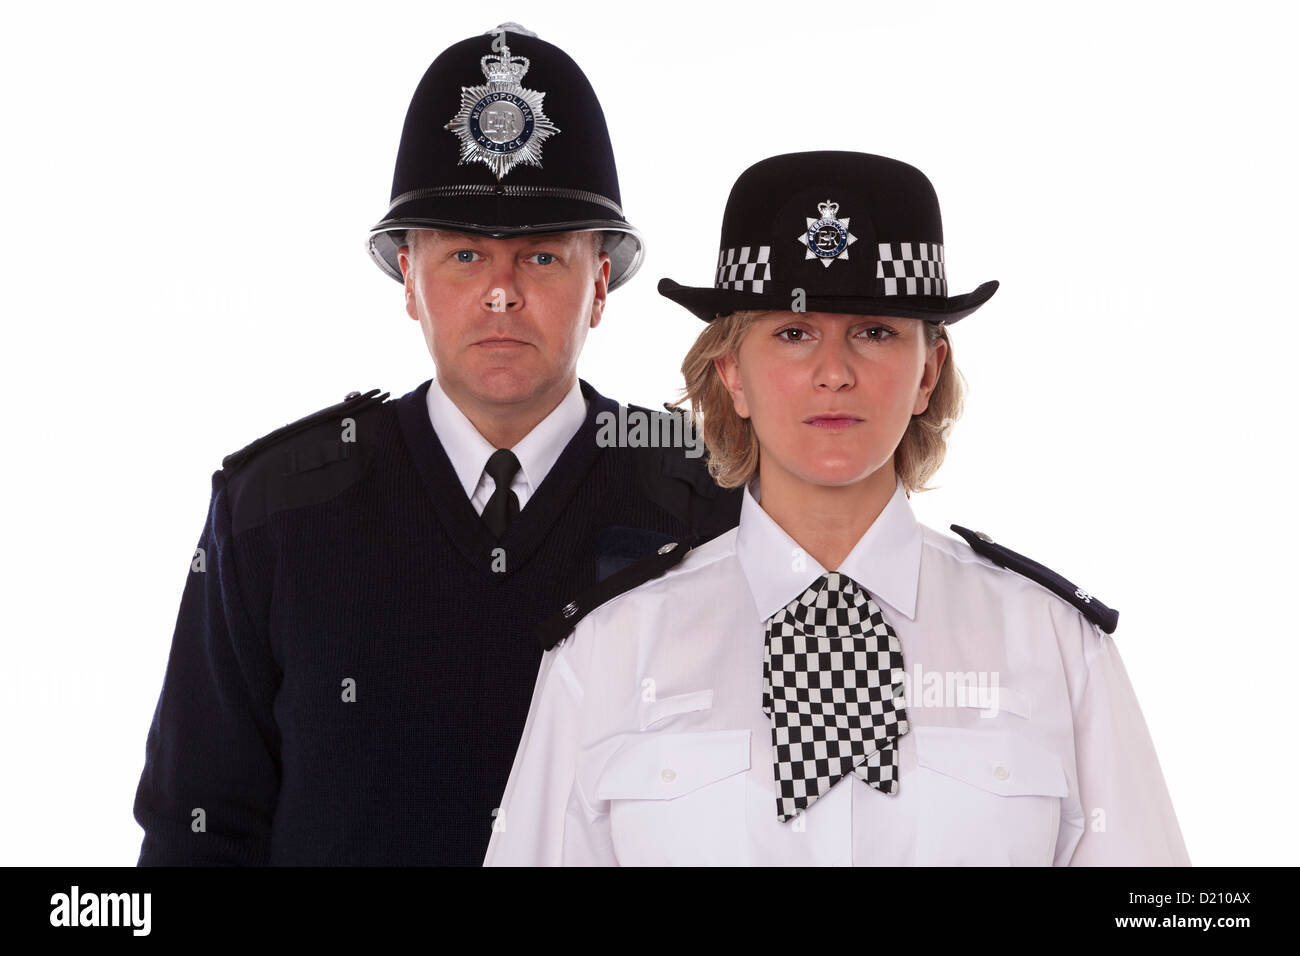 Studio shot of male and female British Police officers in traditional uniform. Stock Photo